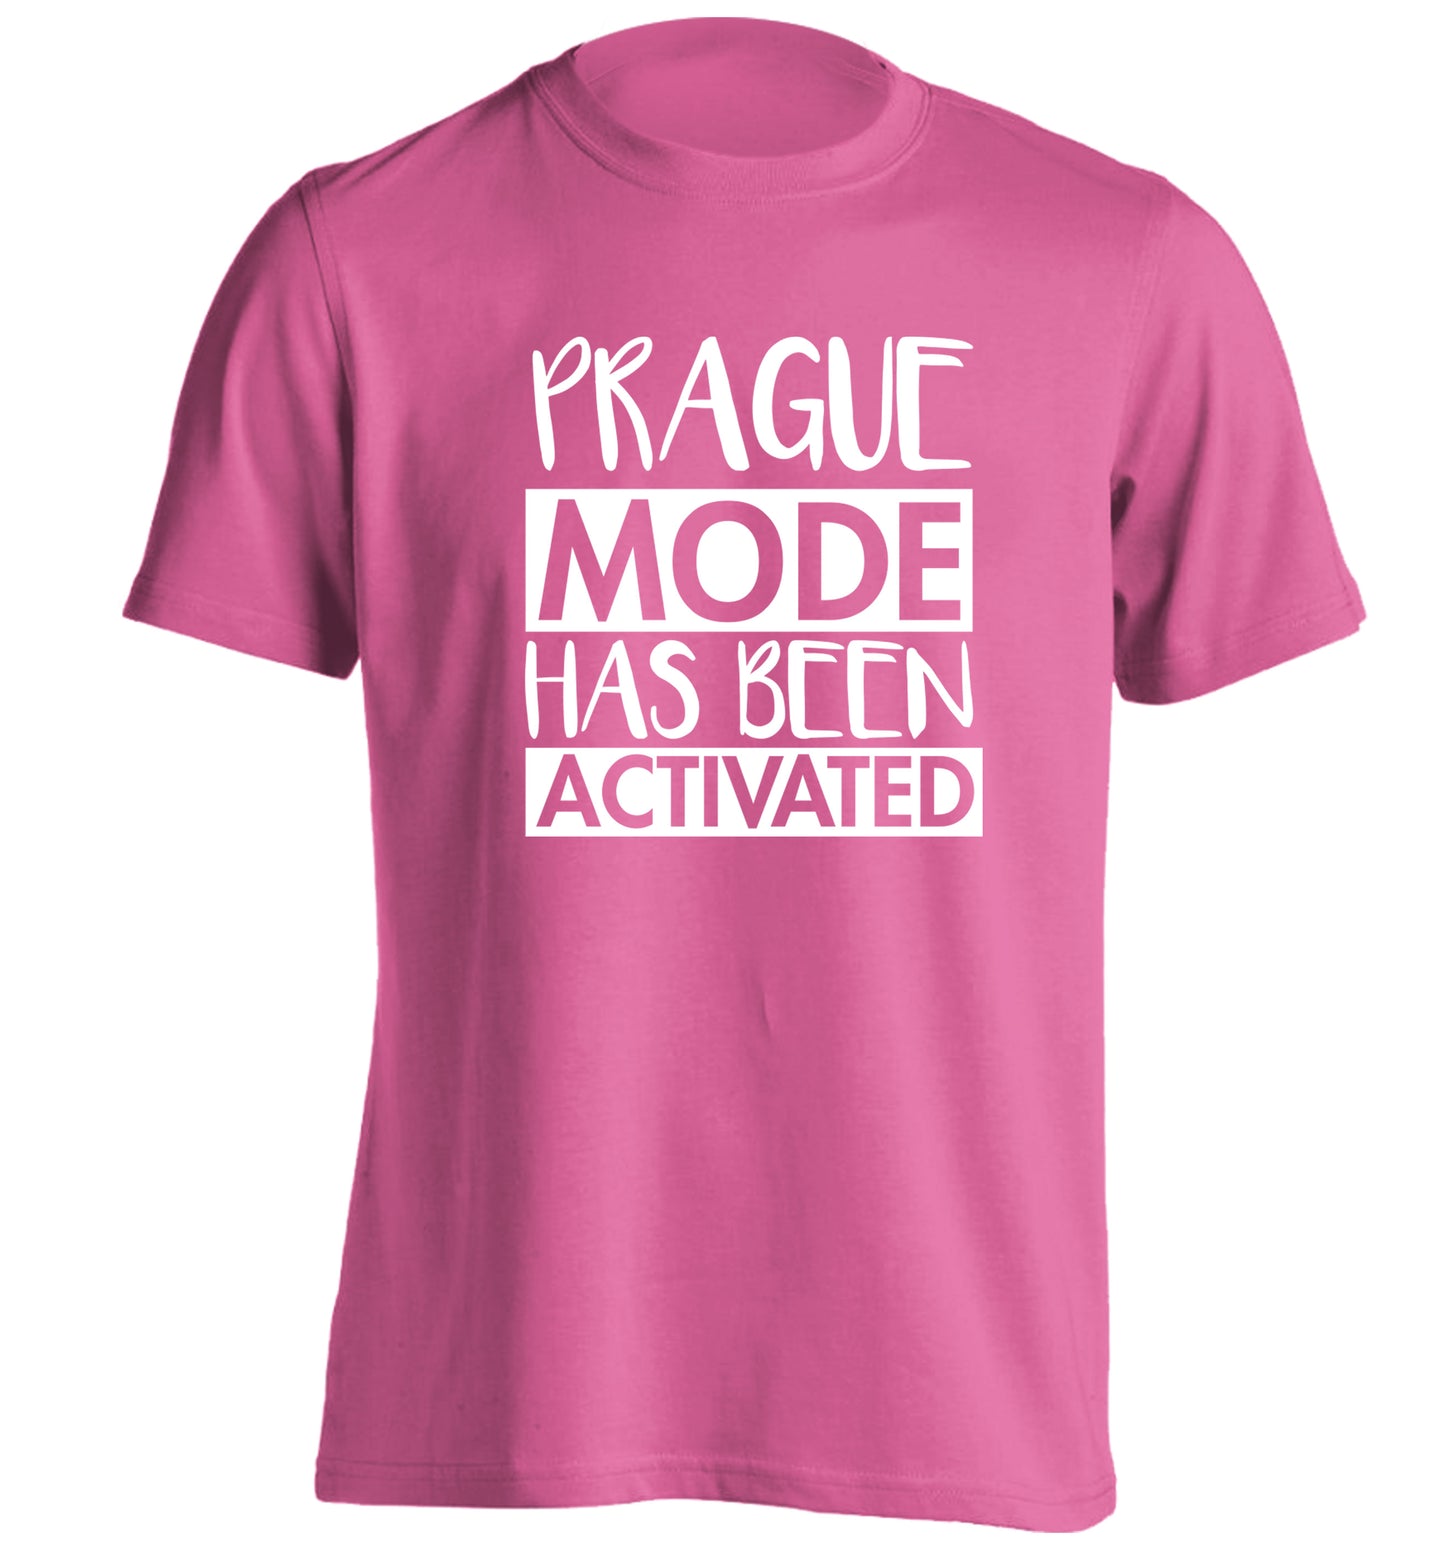 Prague mode has been activated adults unisex pink Tshirt 2XL